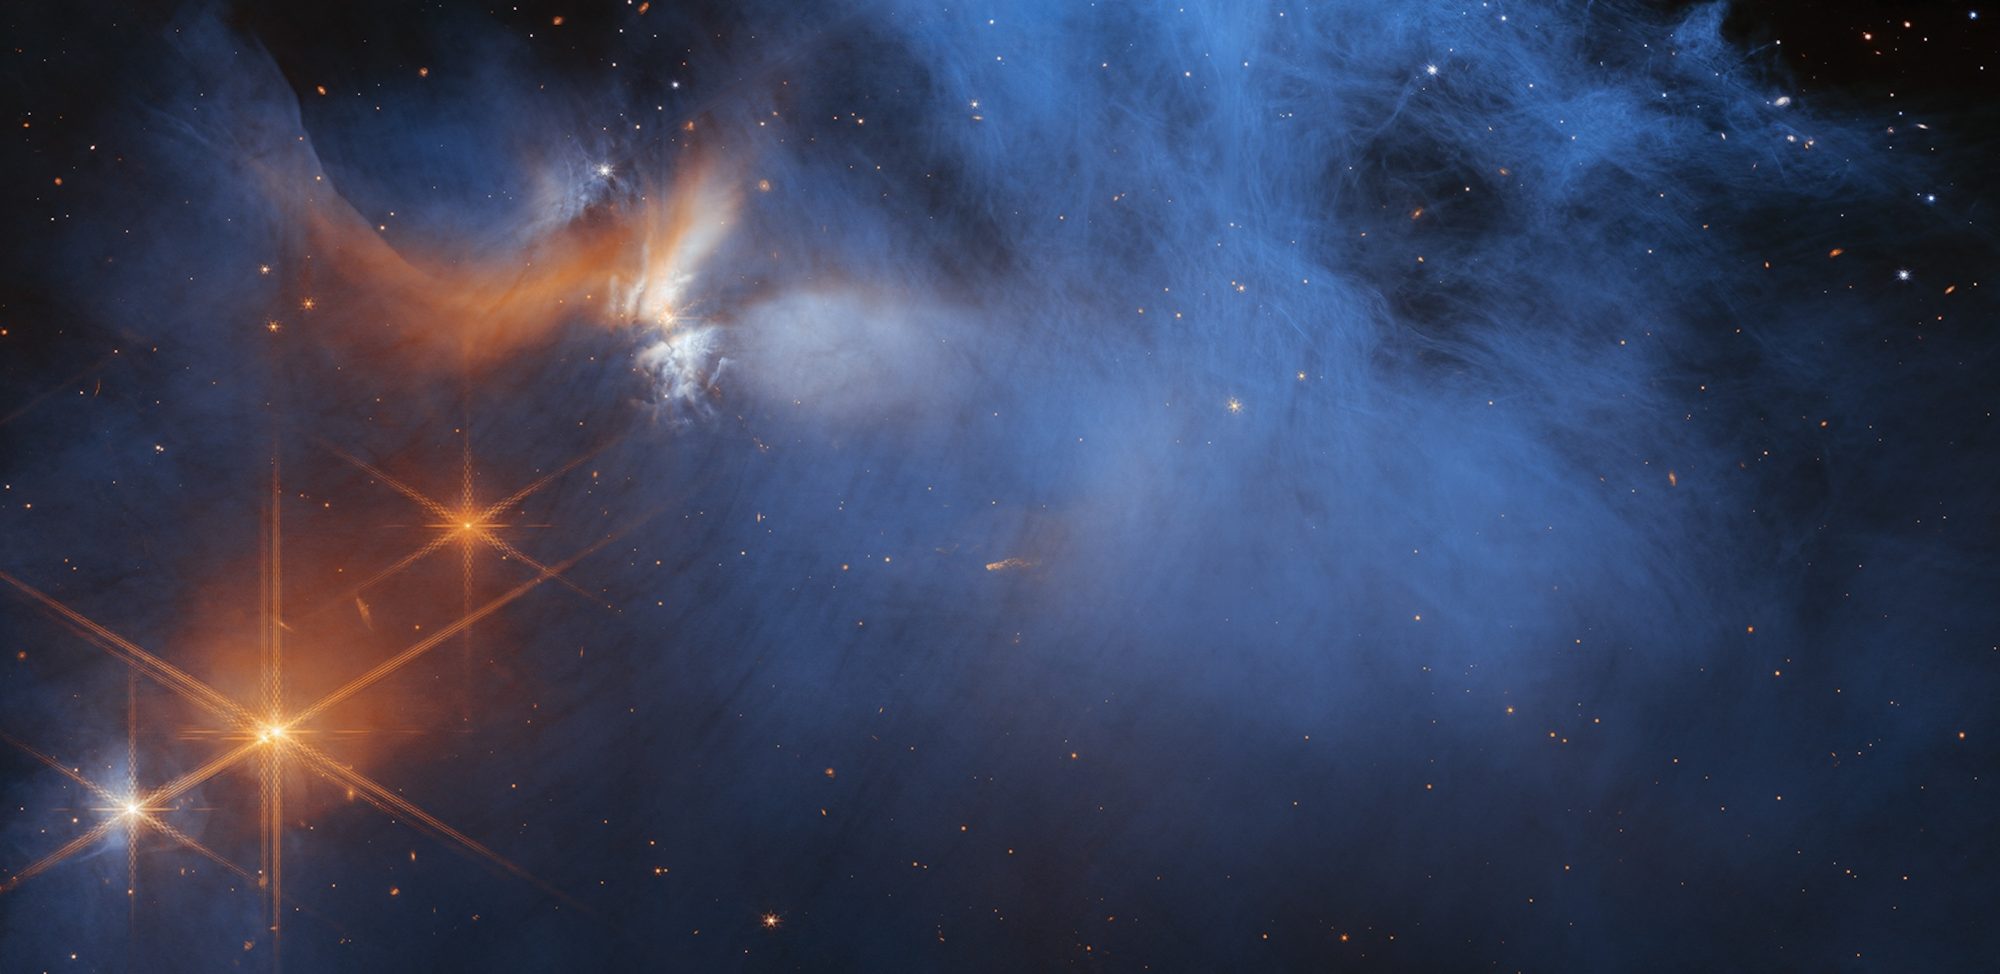 This image by NASA’s James Webb Space Telescope’s Near-Infrared Camera (NIRCam) features the central region of the Chamaeleon I dark molecular cloud, which resides 630 light years away. The cold, wispy cloud material (blue, center) is illuminated in the infrared by the glow of the young, outflowing protostar Ced 110 IRS 4 (orange, upper left). The light from numerous background stars, seen as orange dots behind the cloud, can be used to detect ices in the cloud, which absorb the starlight passing through them